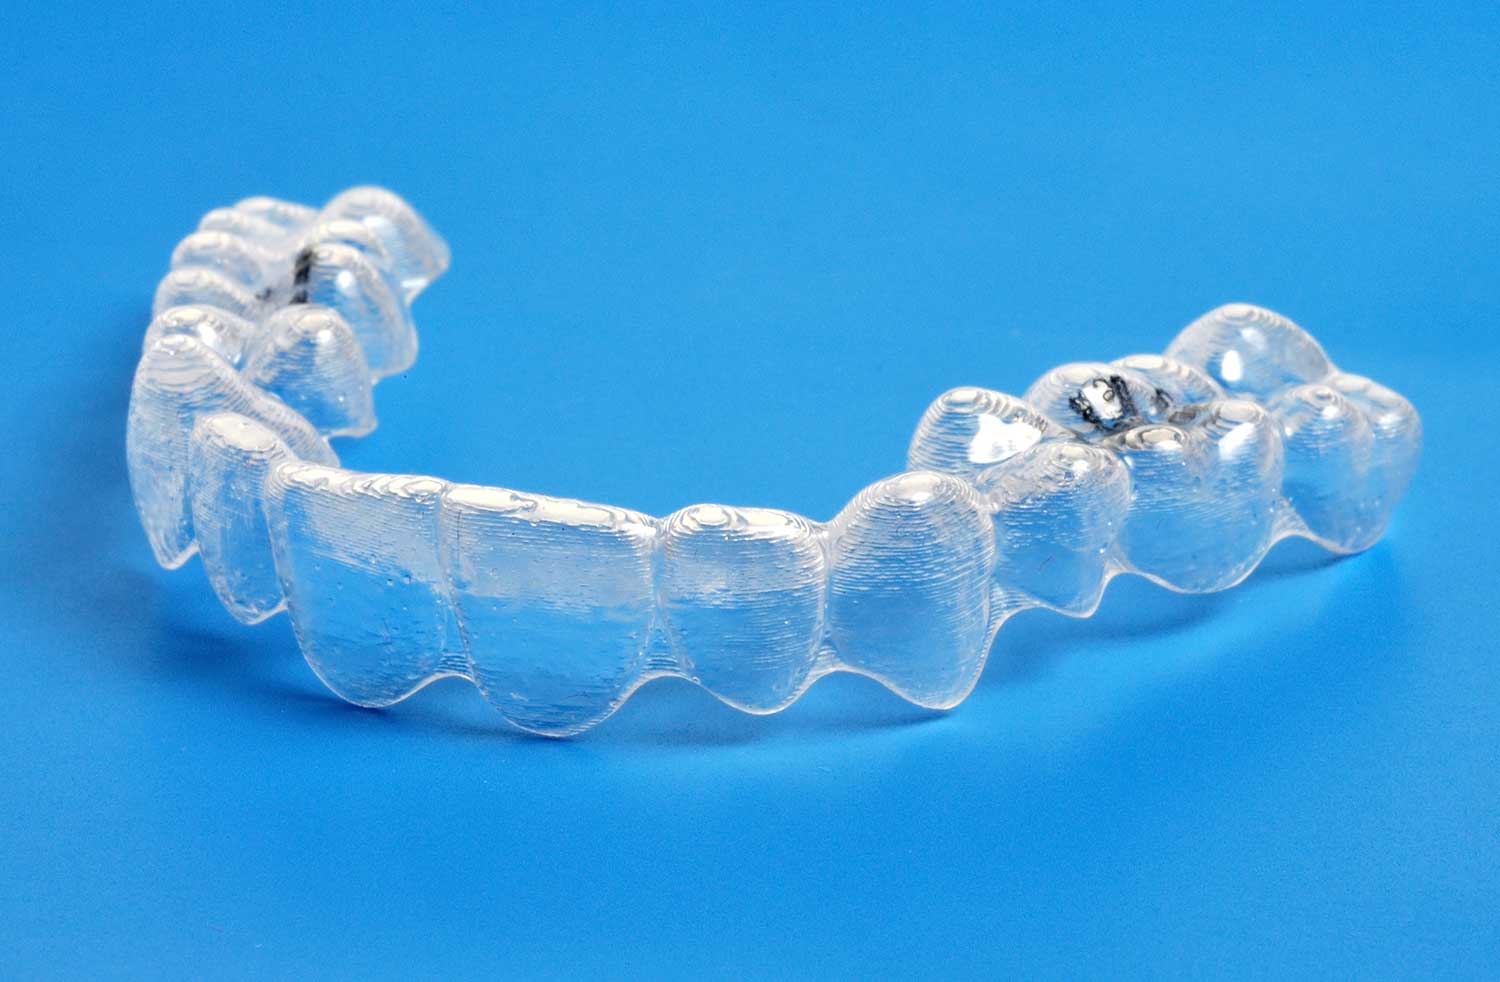 Are There Alternatives to Invisalign?